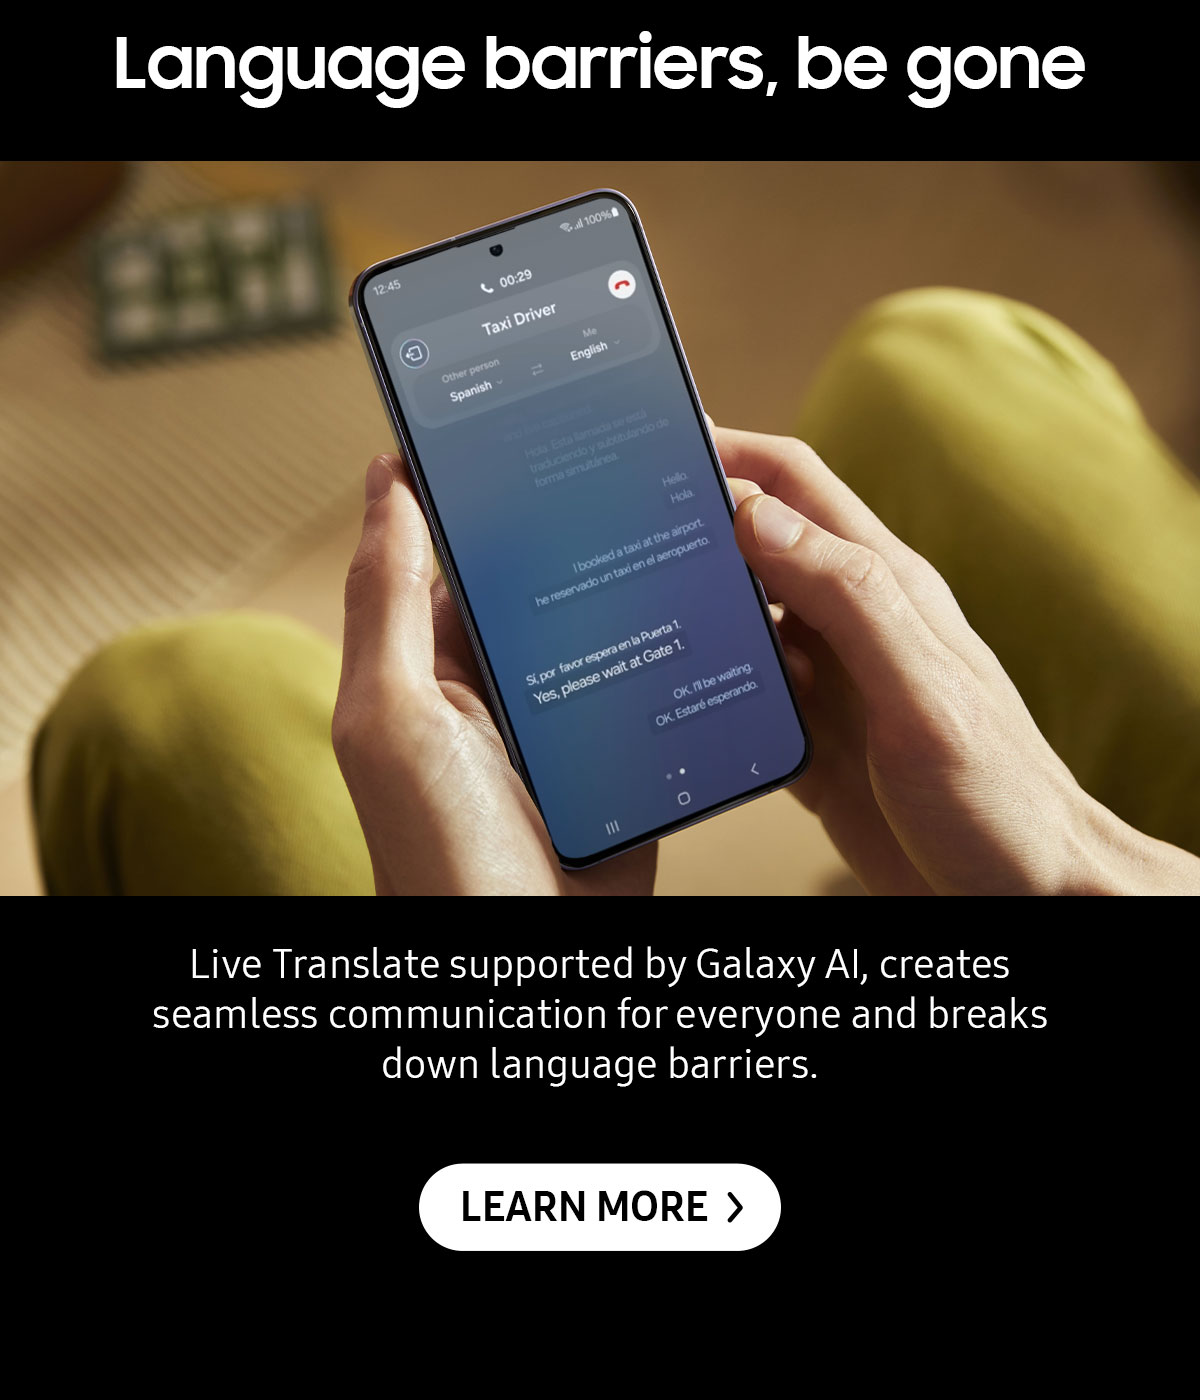 Language barriers, be gone | Live Translate supported by Galaxy Al, creates seamless communication for everyone and breaks down language barriers. Click here to learn more!